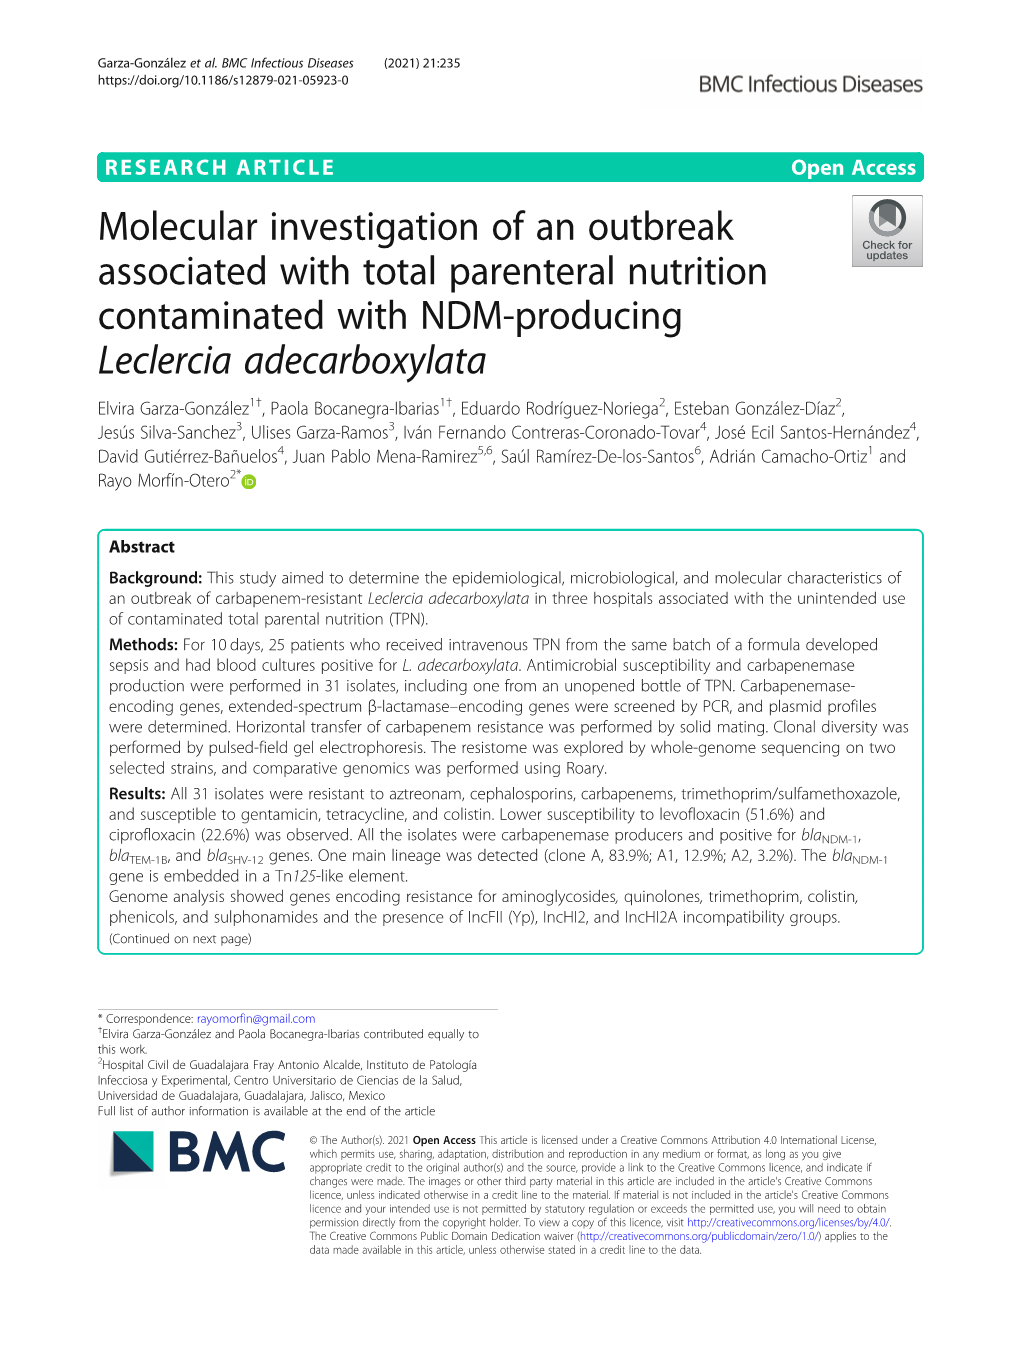 Molecular Investigation of an Outbreak Associated with Total Parenteral Nutrition Contaminated with NDM-Producing Leclercia Adecarboxylata